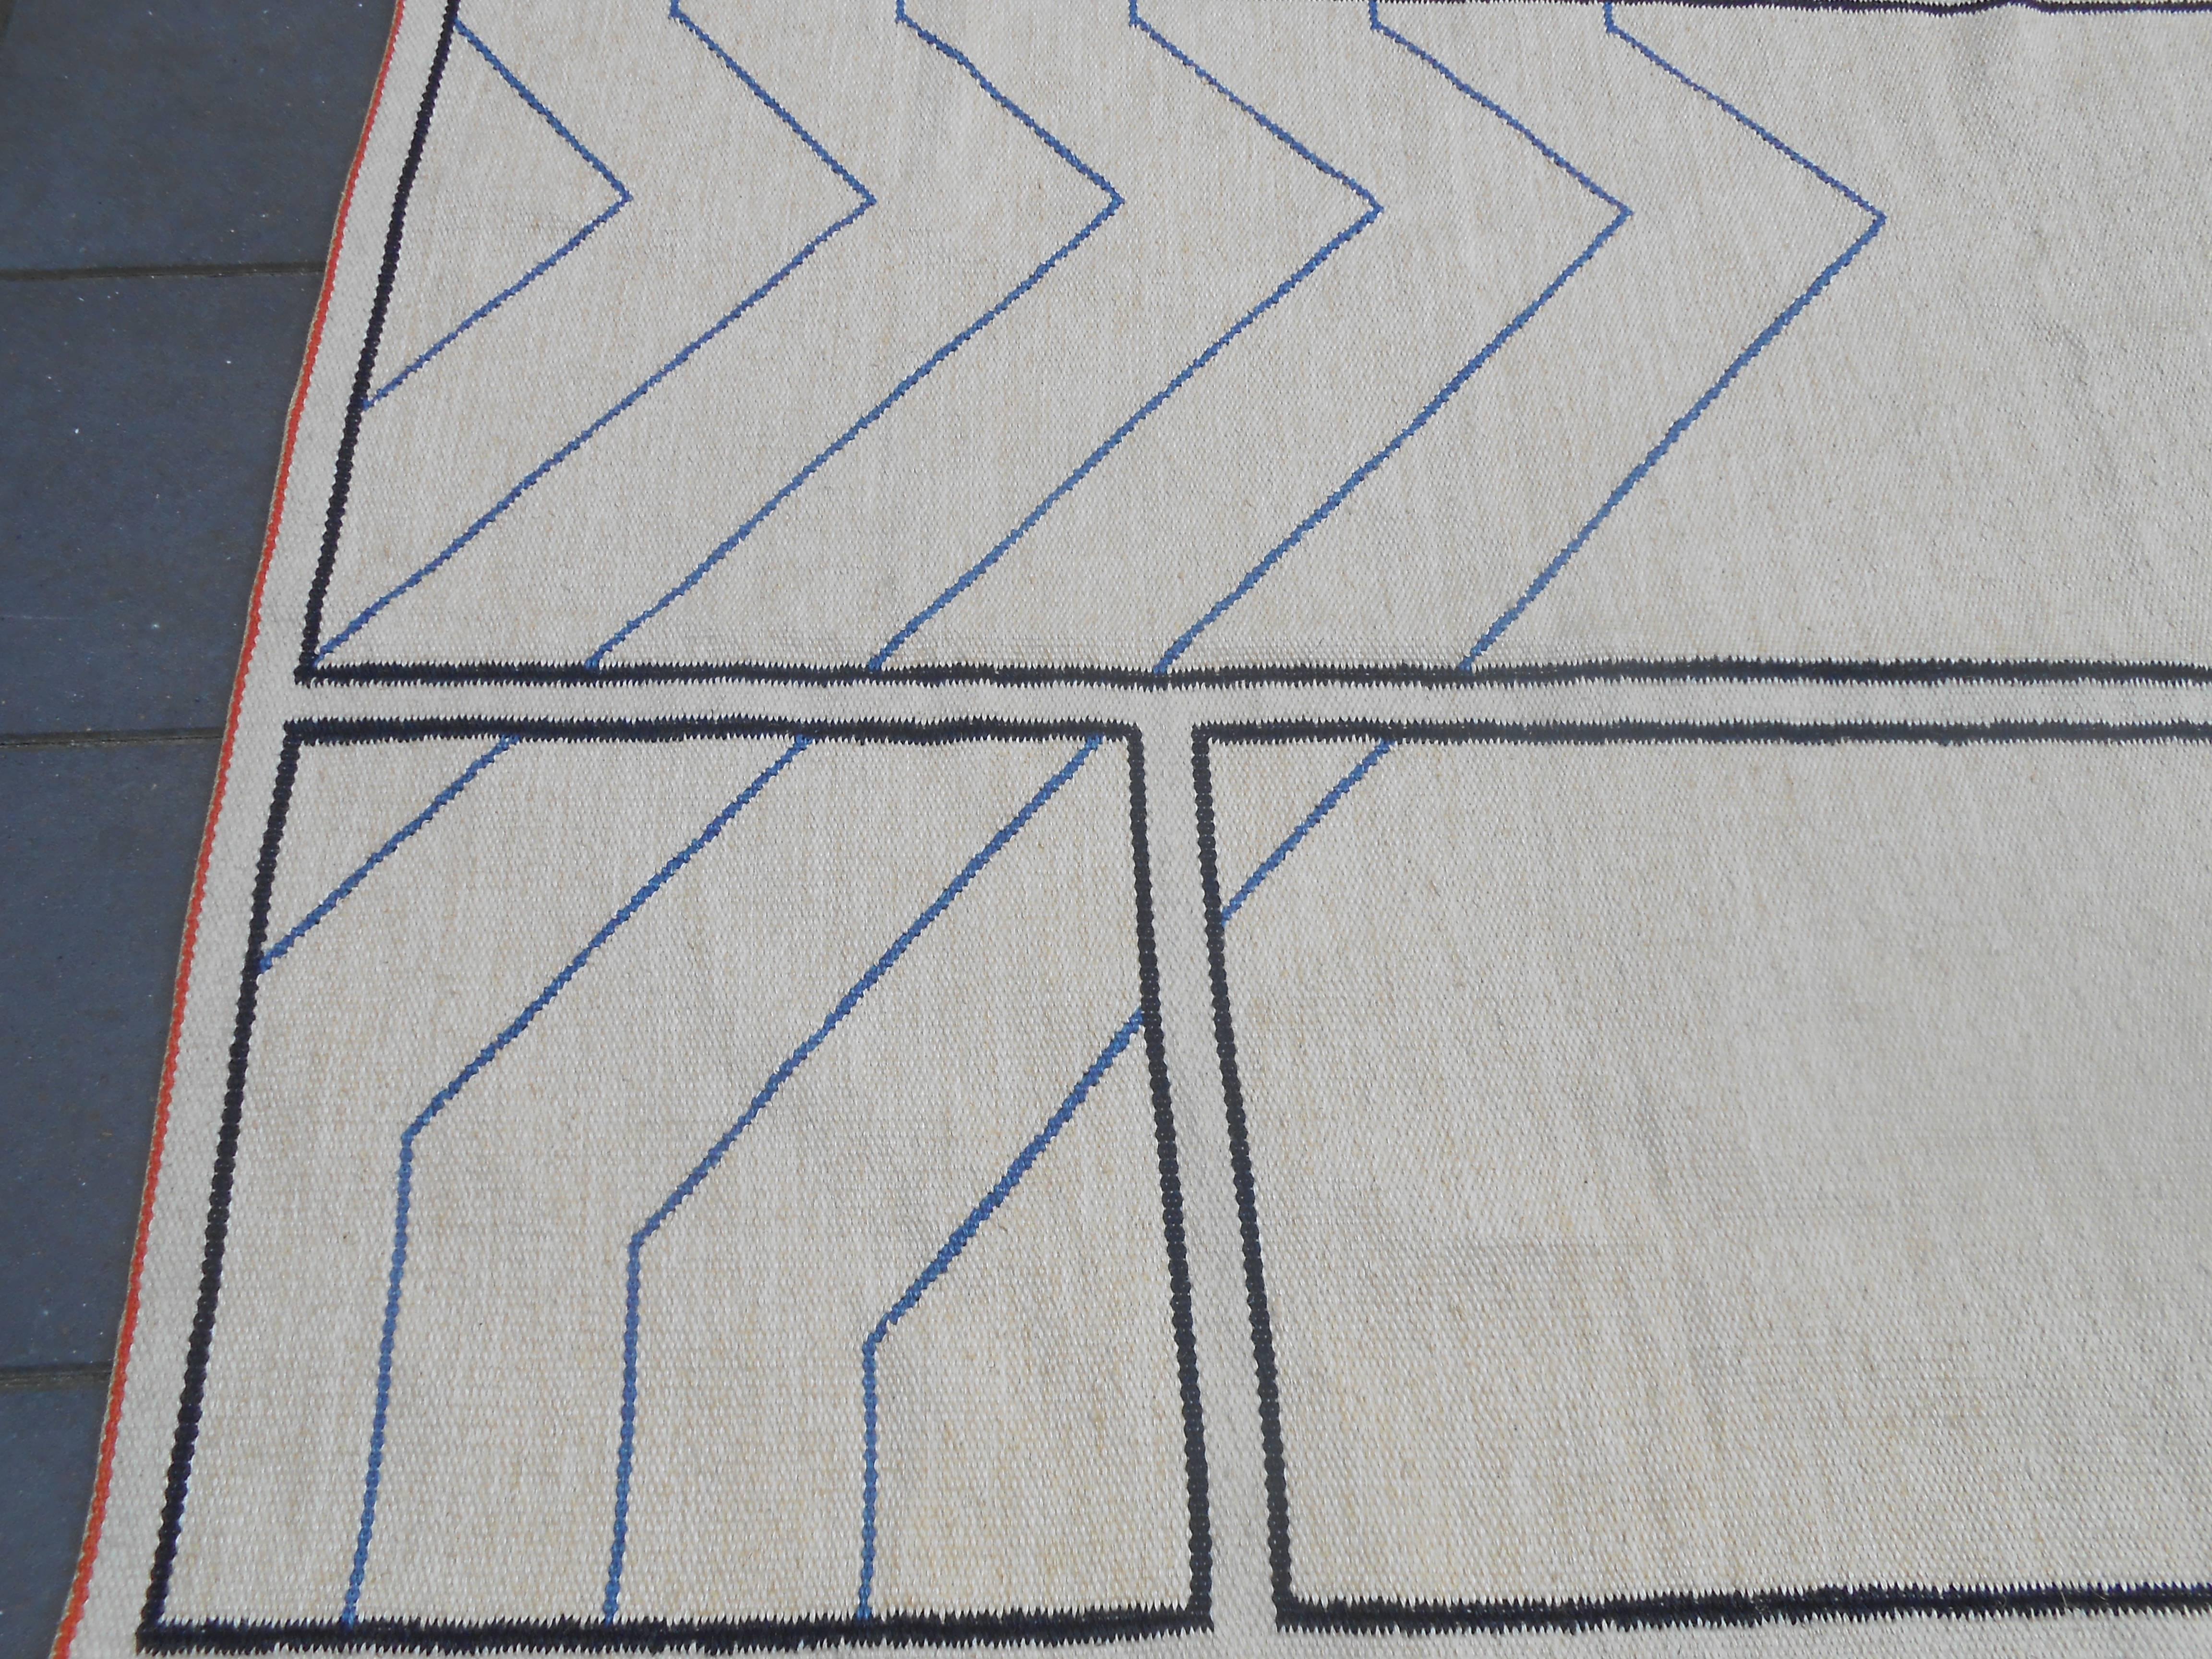 Fabric Unique Gudrun Pagter Art Tapestry 'Composition with Blue Lines, ' circa 1970